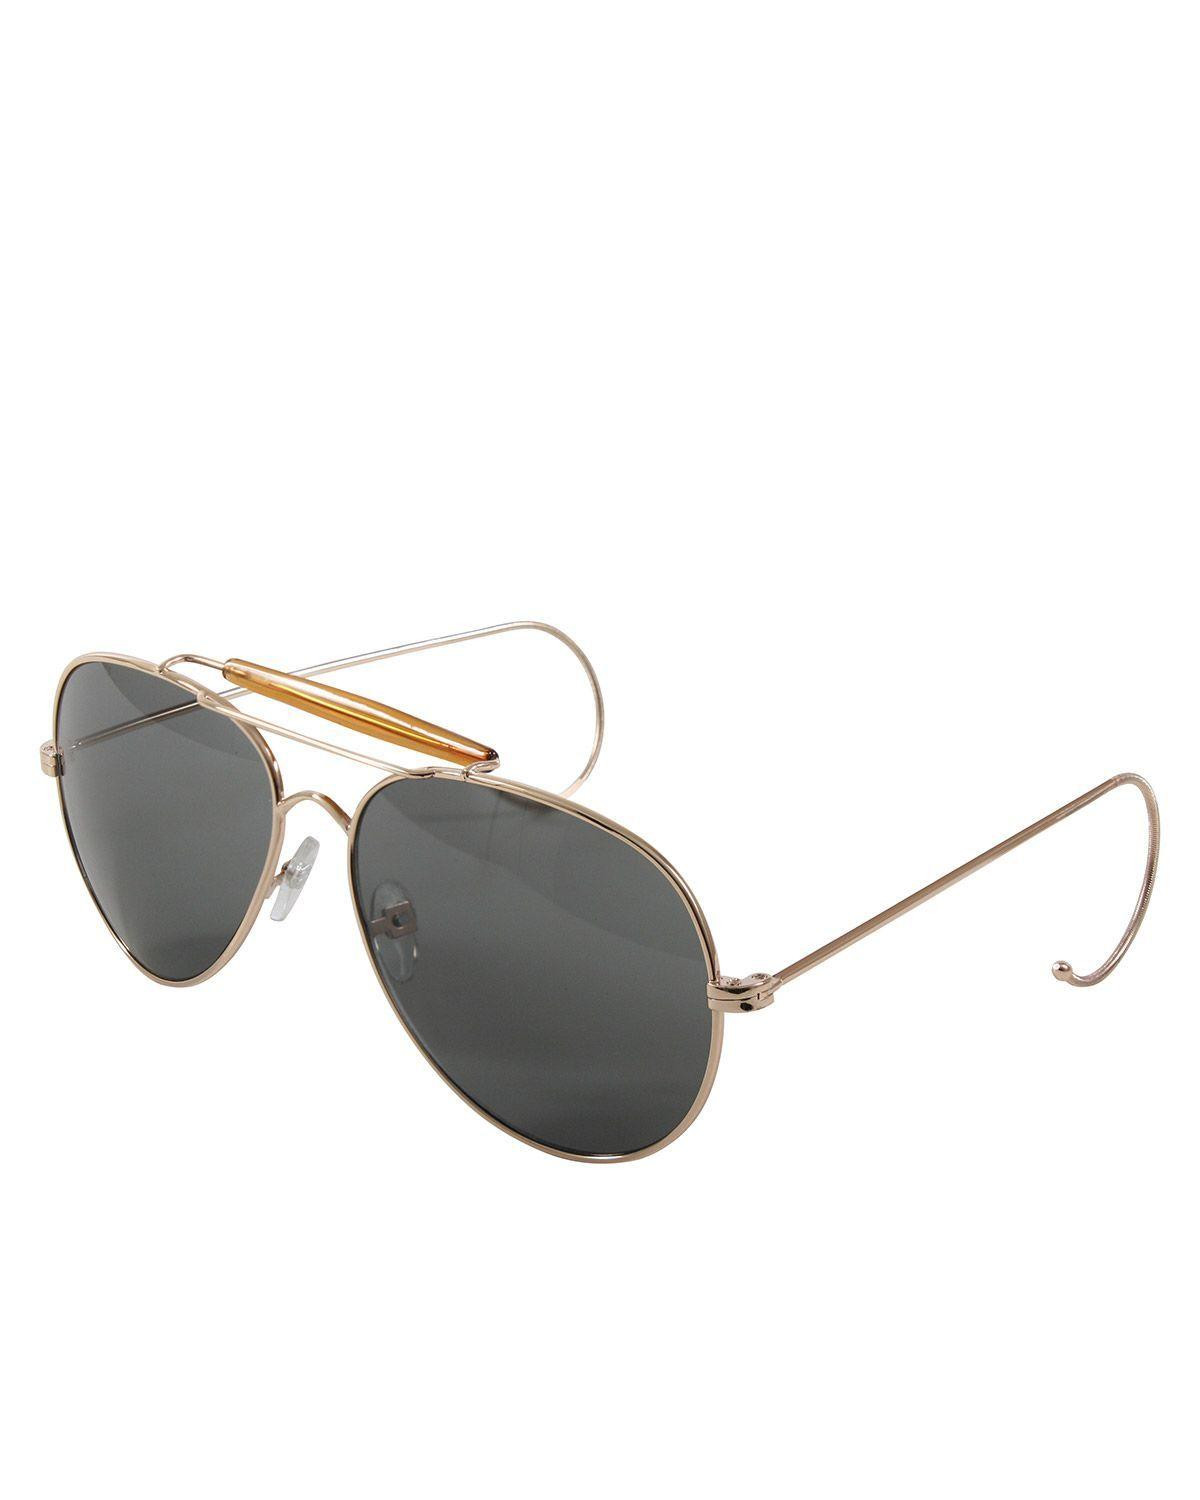 Rothco Air Force Pilot Solbriller - G.I. Type (Guld m. Røget Glas, One Size)